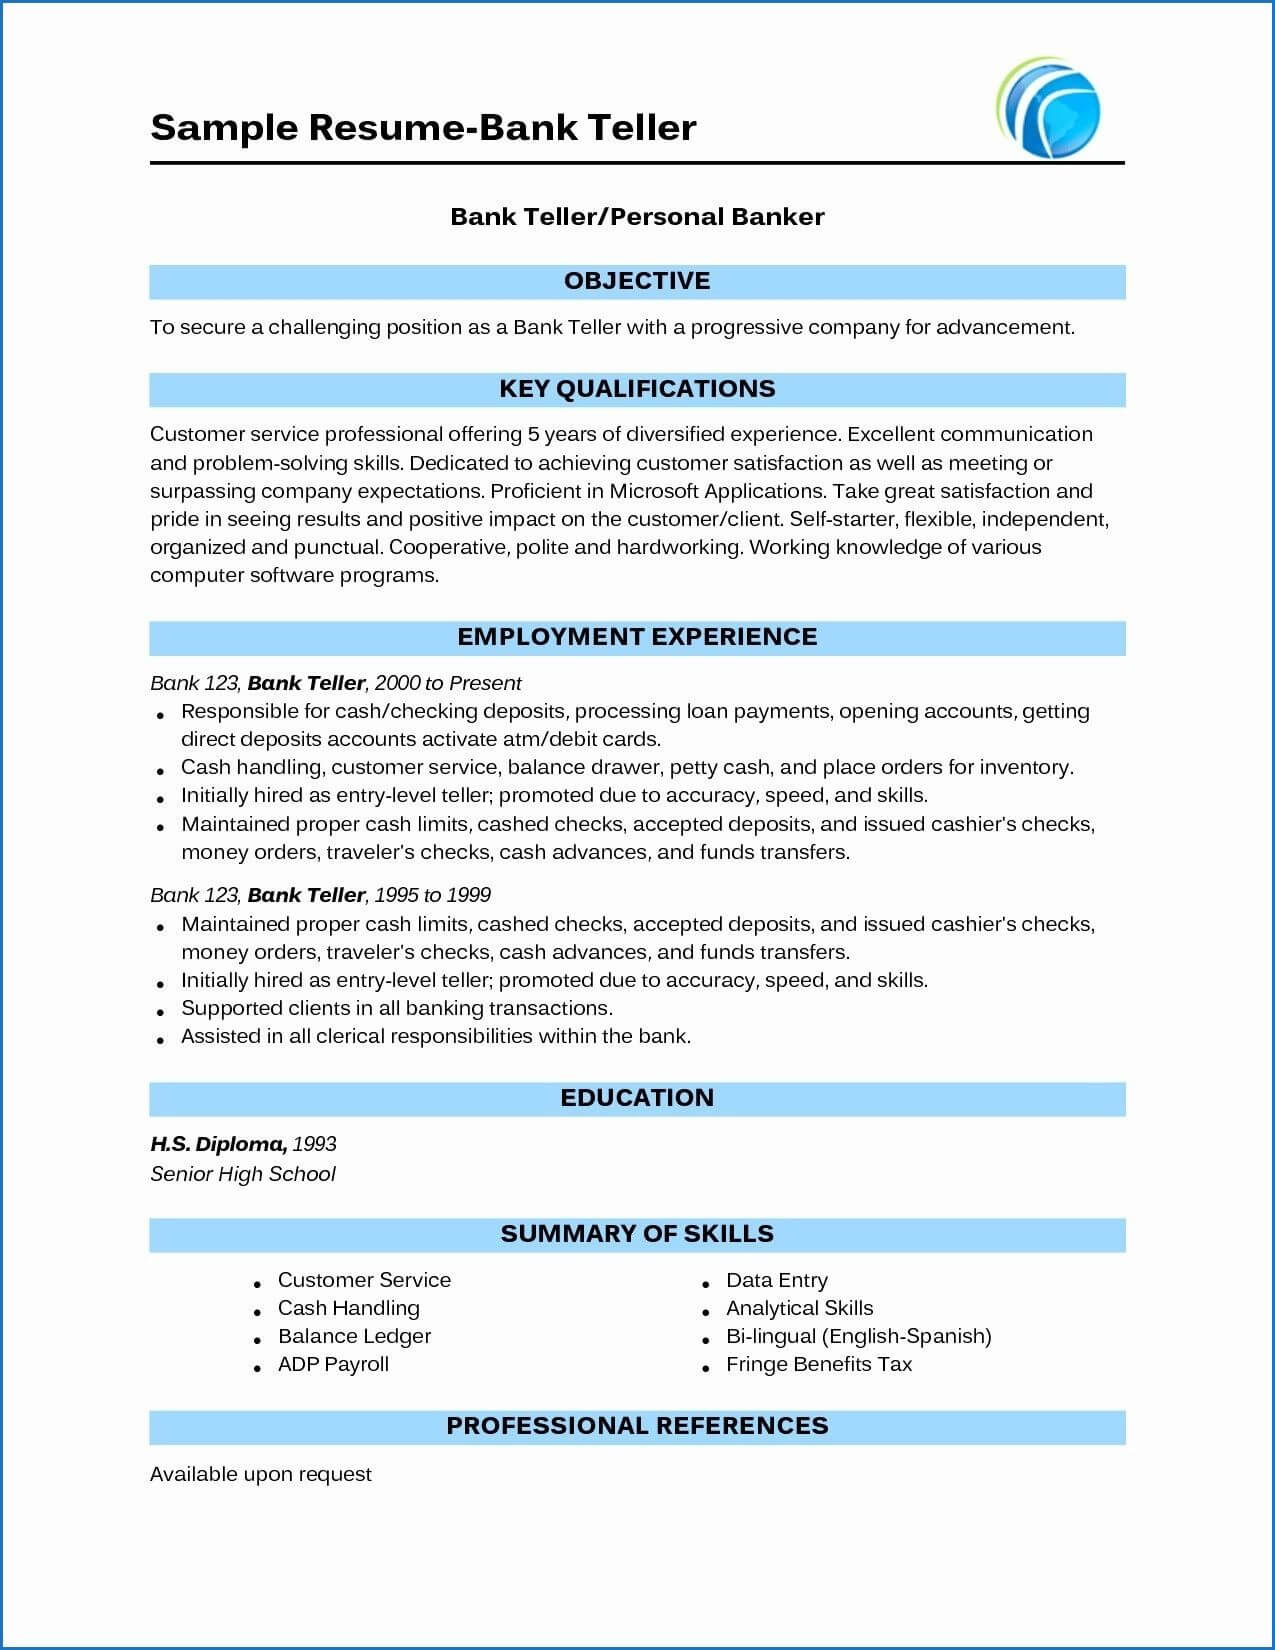 15 Banking Sector Resume Examples | Bank Teller Resume Inside Hiv Aids Brochure Templates